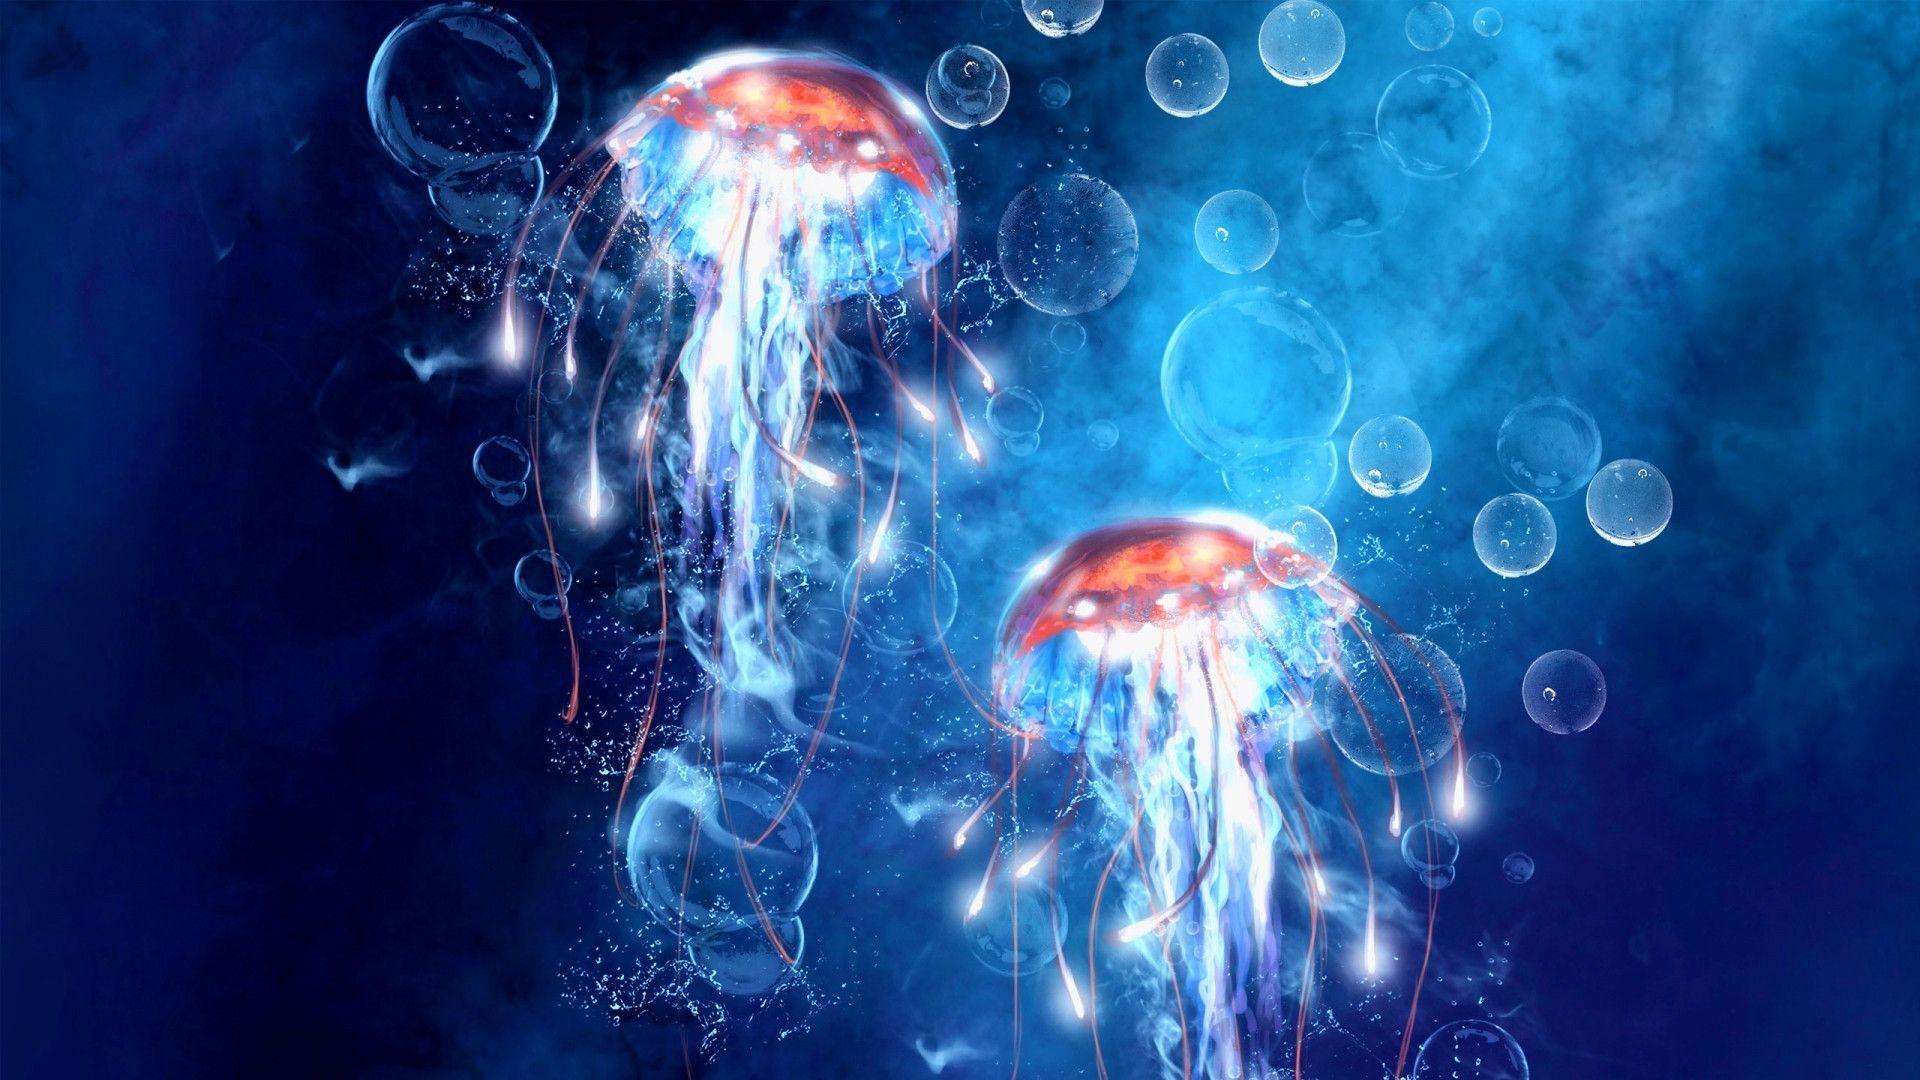 Jellyfish Wallpaper Android Jellyfish Wide HD